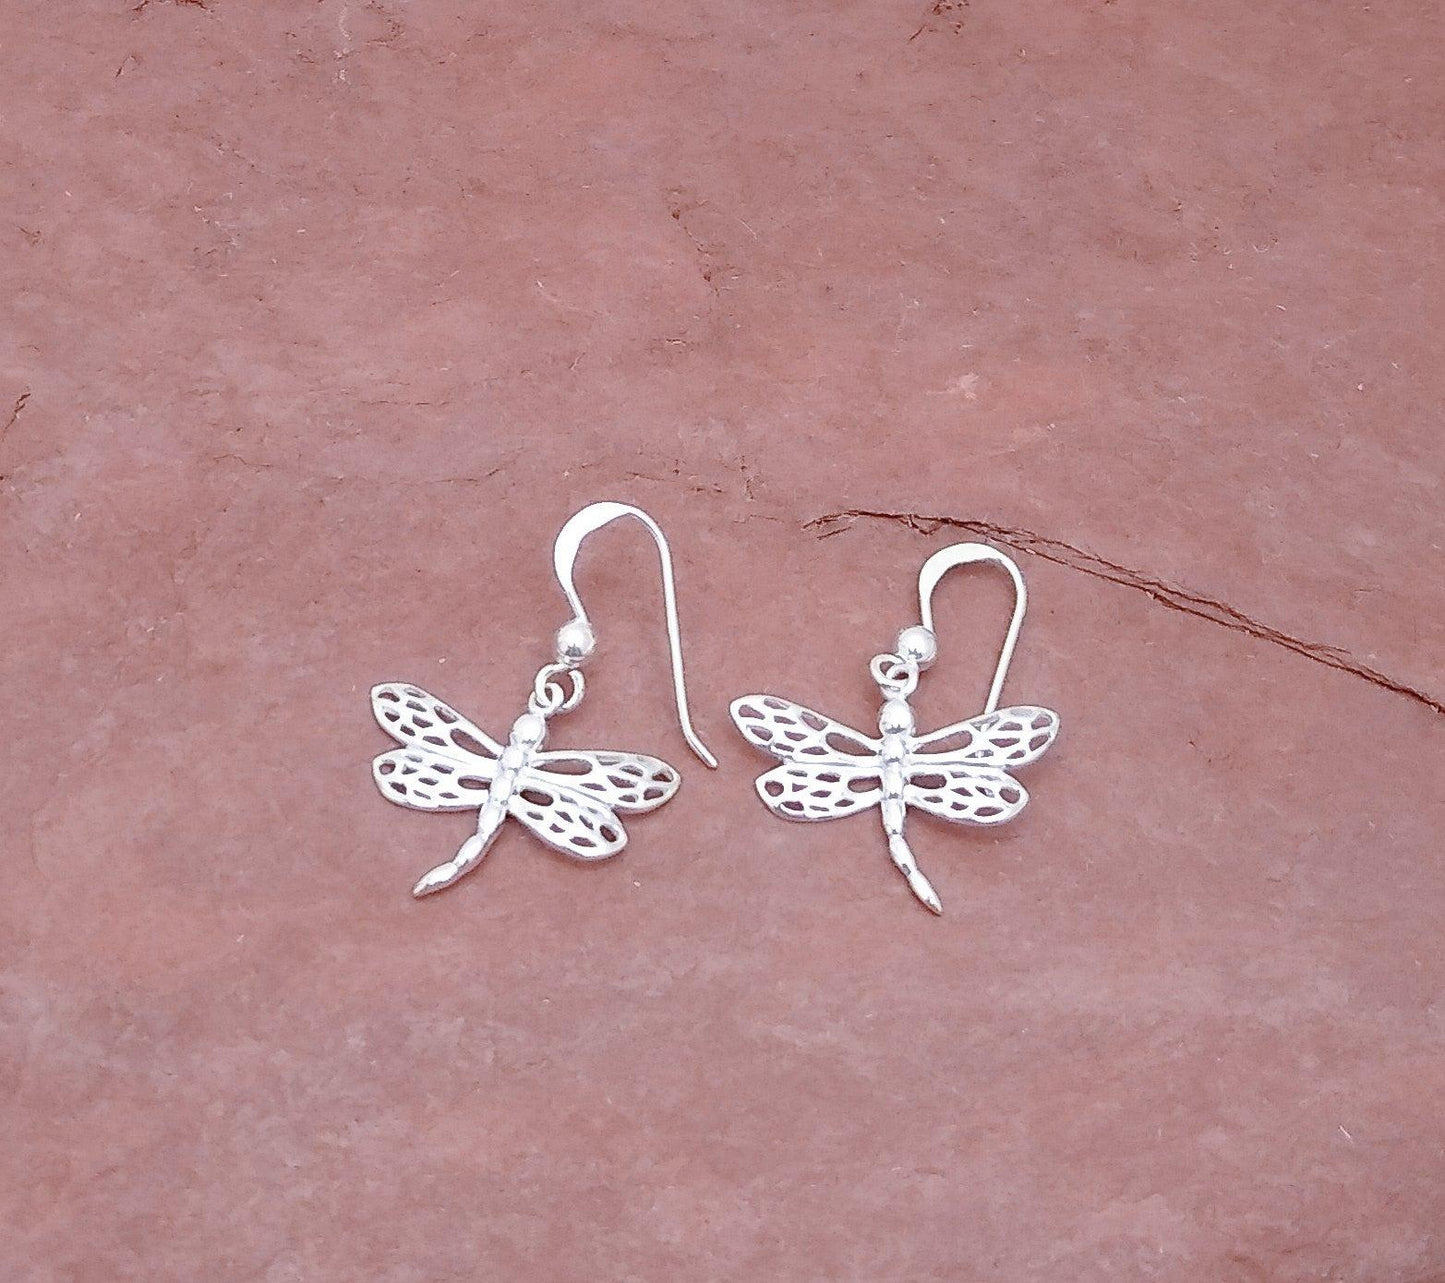 Sterling drop earring of dragonfly with 4 wings with cutout details and straight tail on a French wire